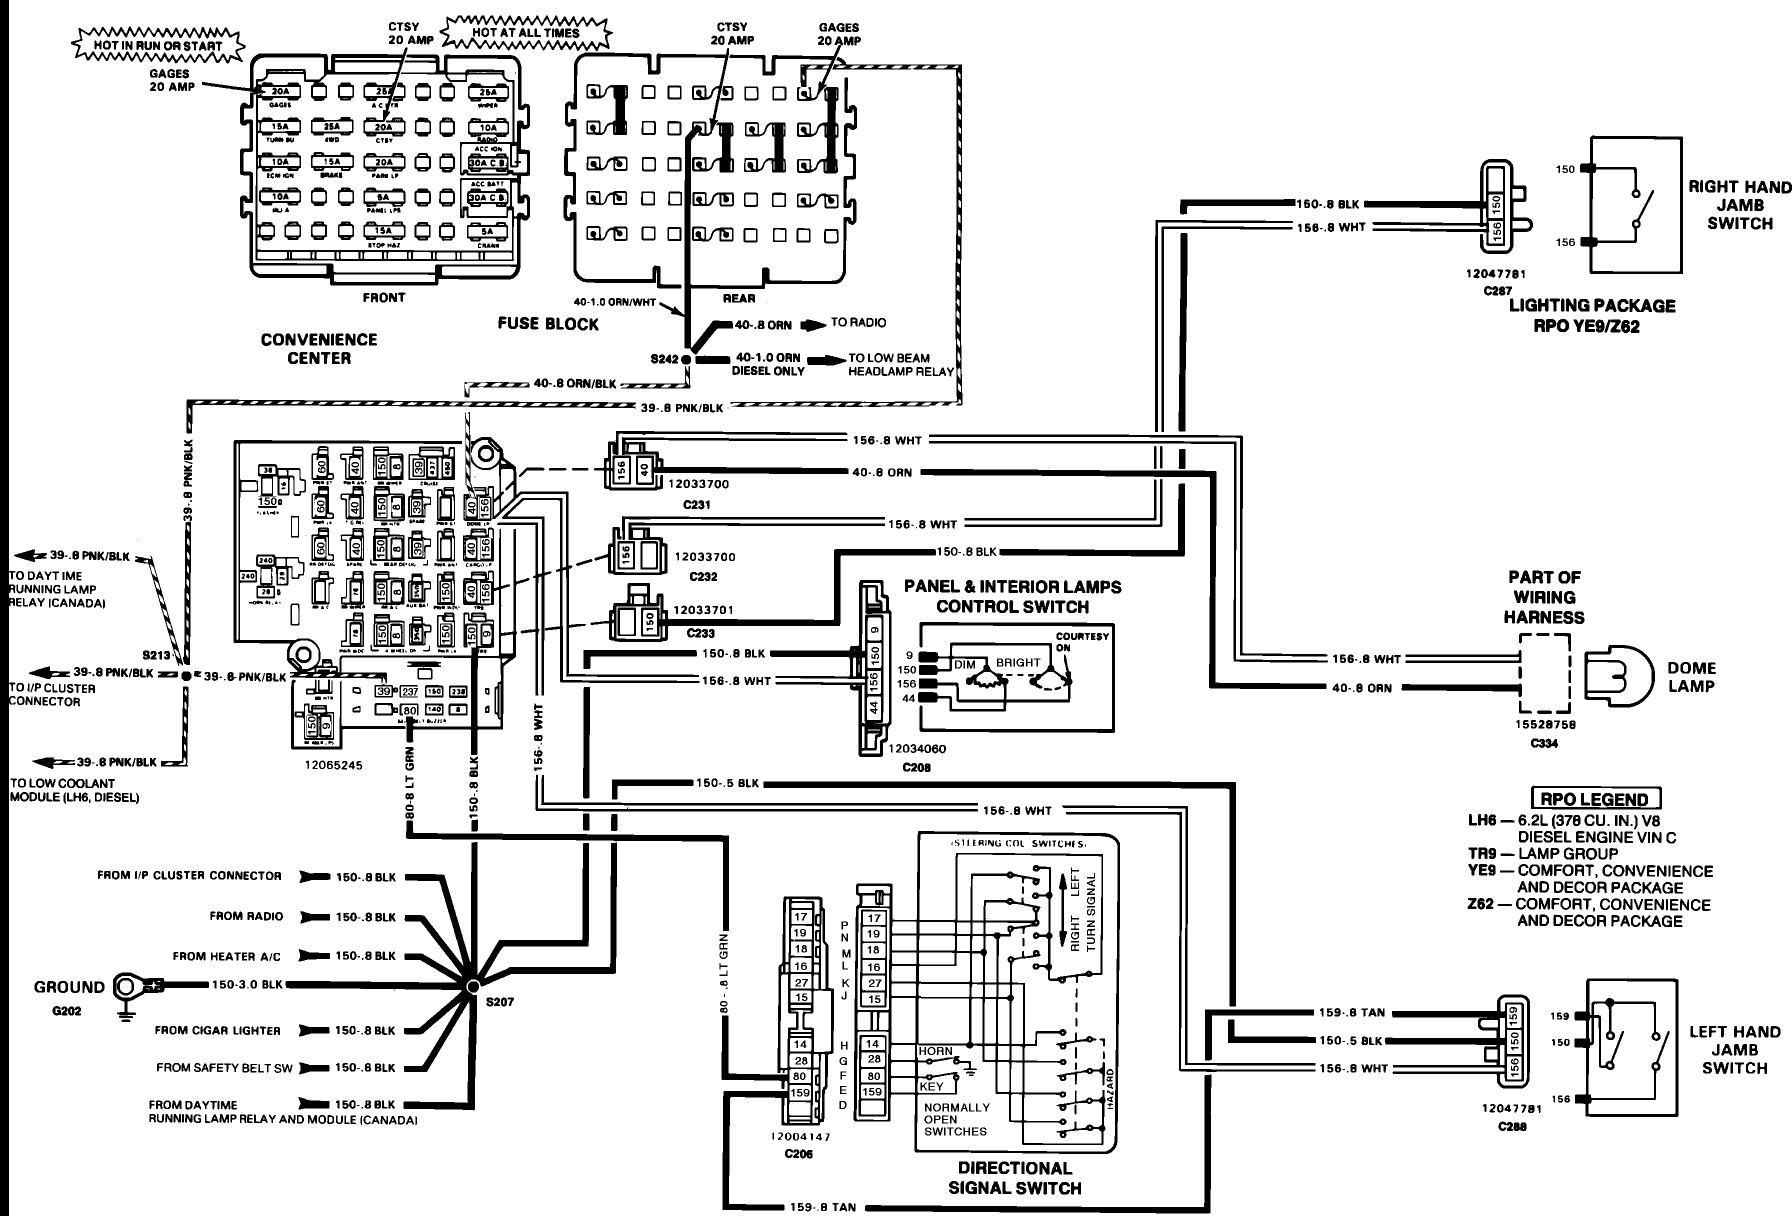 92 Chevy S10 Wiring Diagrams / Fuse Box For A 92 S10 | schematic and